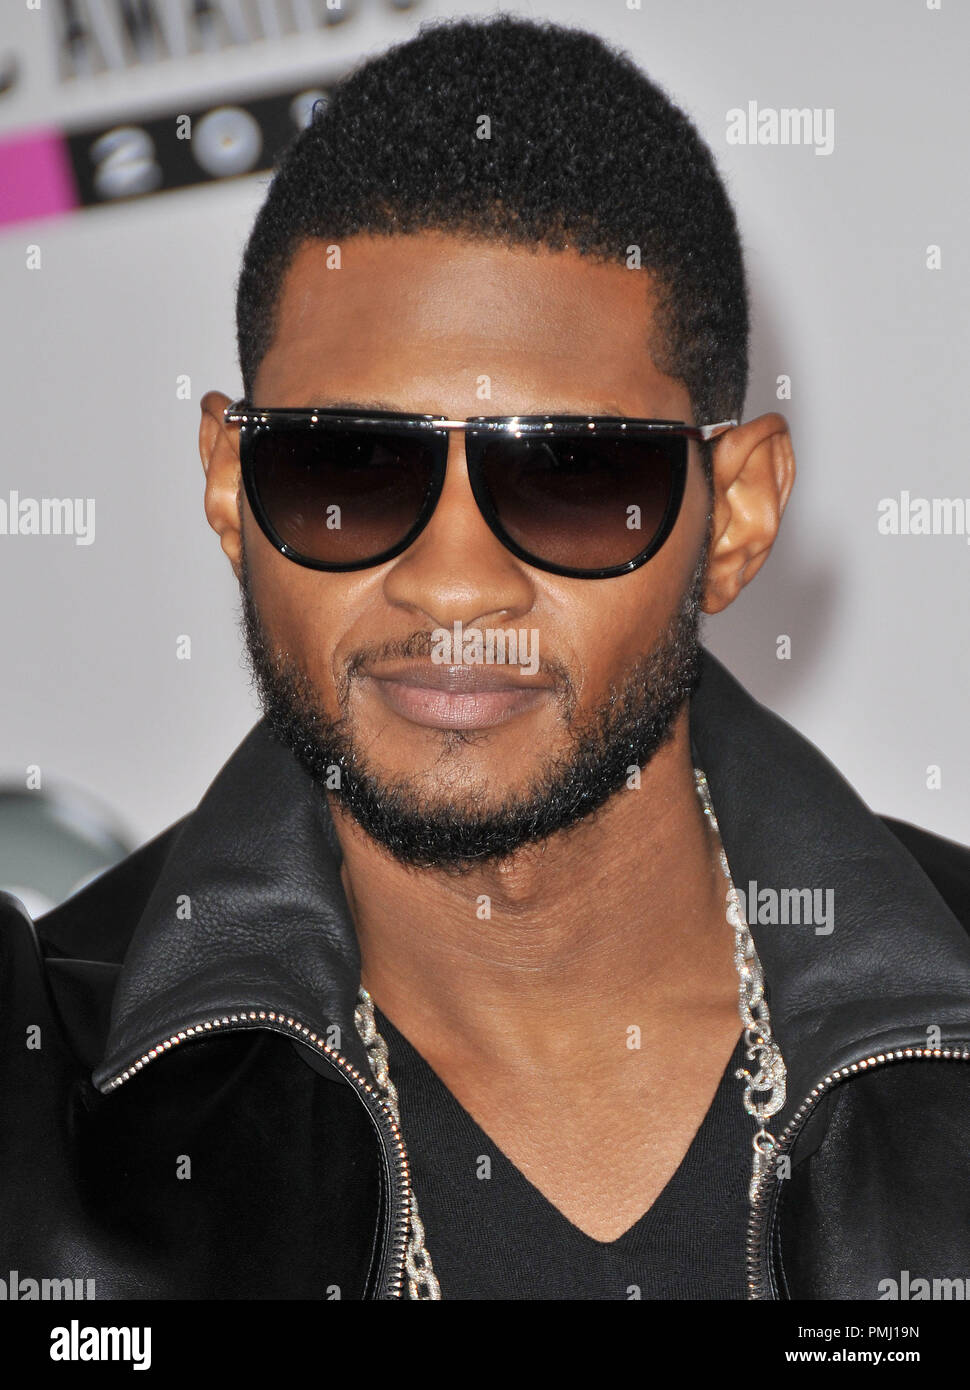 Usher at the 2010 American Music Awards - Arrivals held at the Nokia Theatre L.A. Live in Los Angeles, CA. The event took place on Sunday, November 21, 2010. Photo by PRPP Pacific Rim Photo Press. File Reference # 30722 285PLX   For Editorial Use Only -  All Rights Reserved Stock Photo